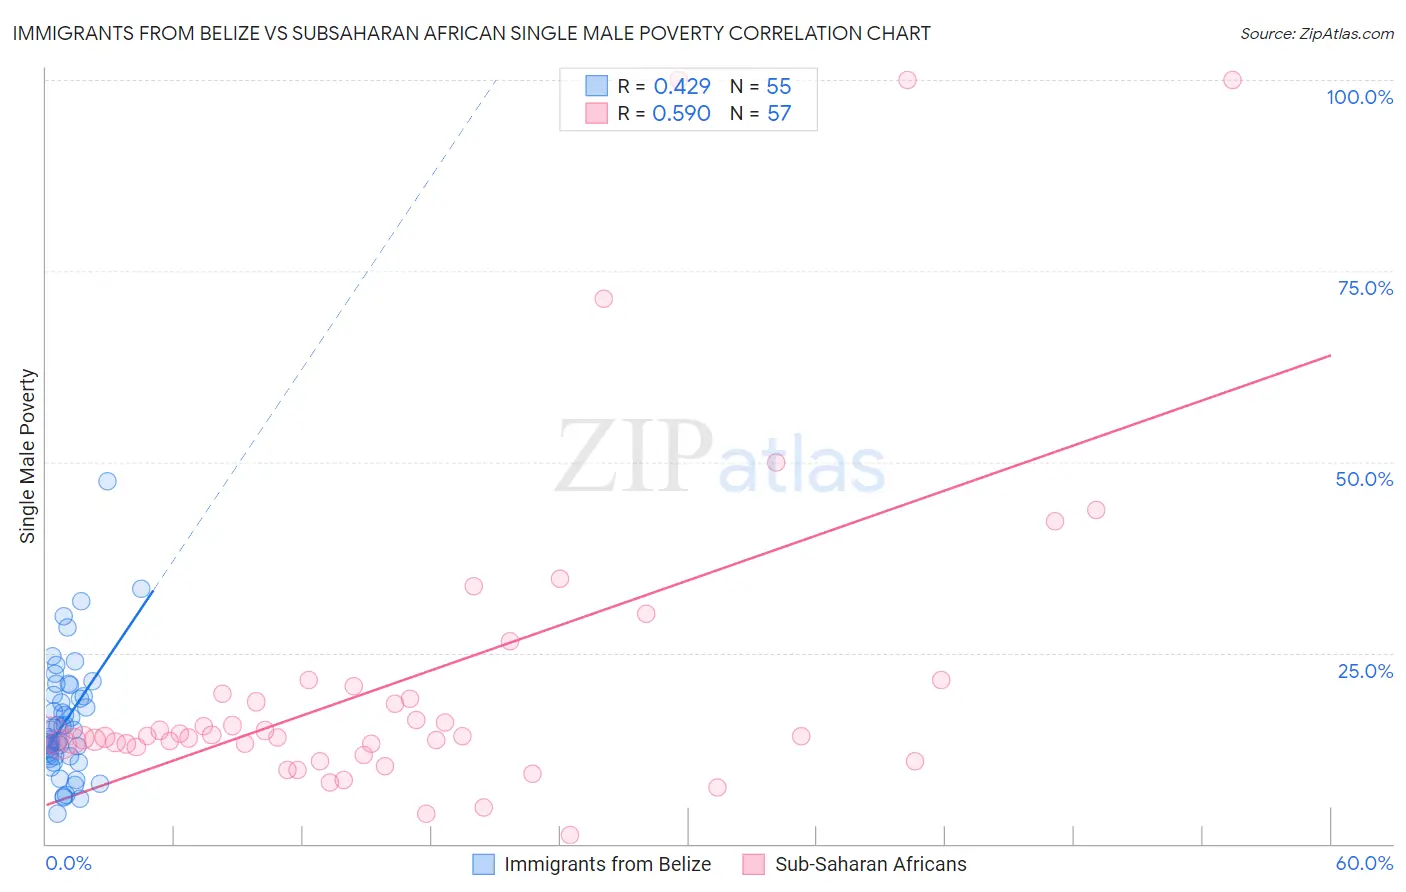 Immigrants from Belize vs Subsaharan African Single Male Poverty